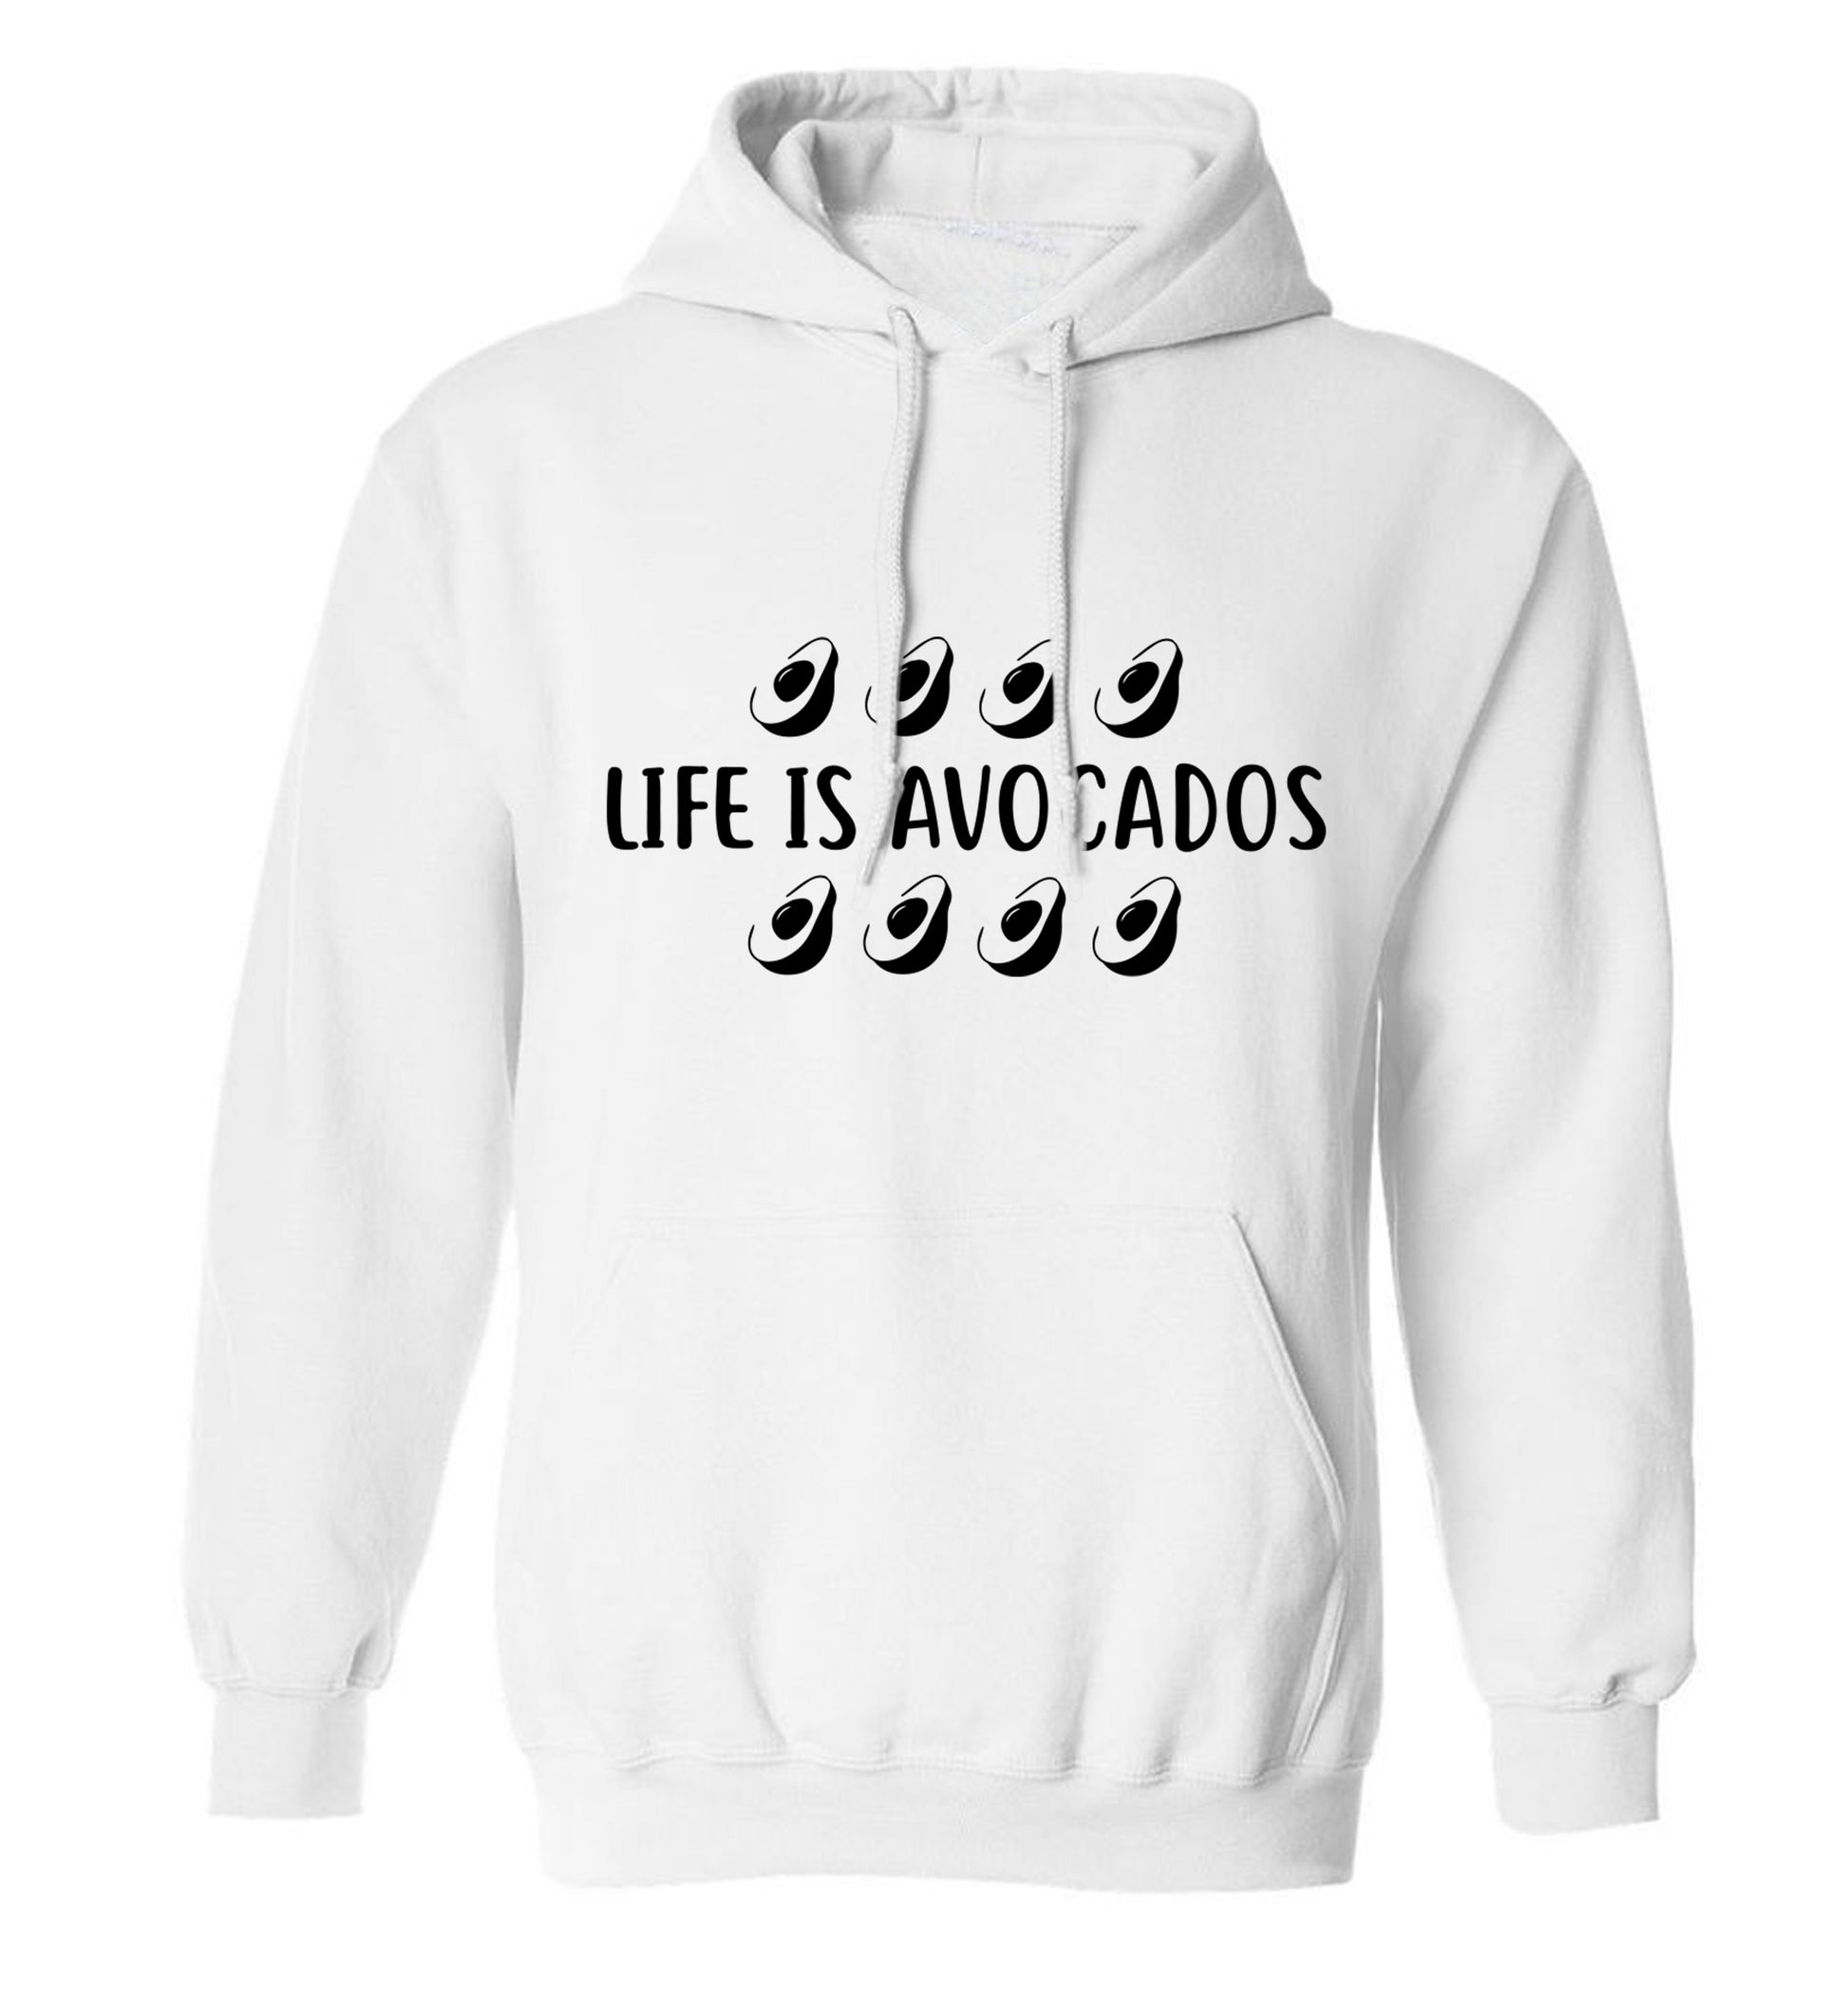 Life is avocados adults unisex white hoodie 2XL